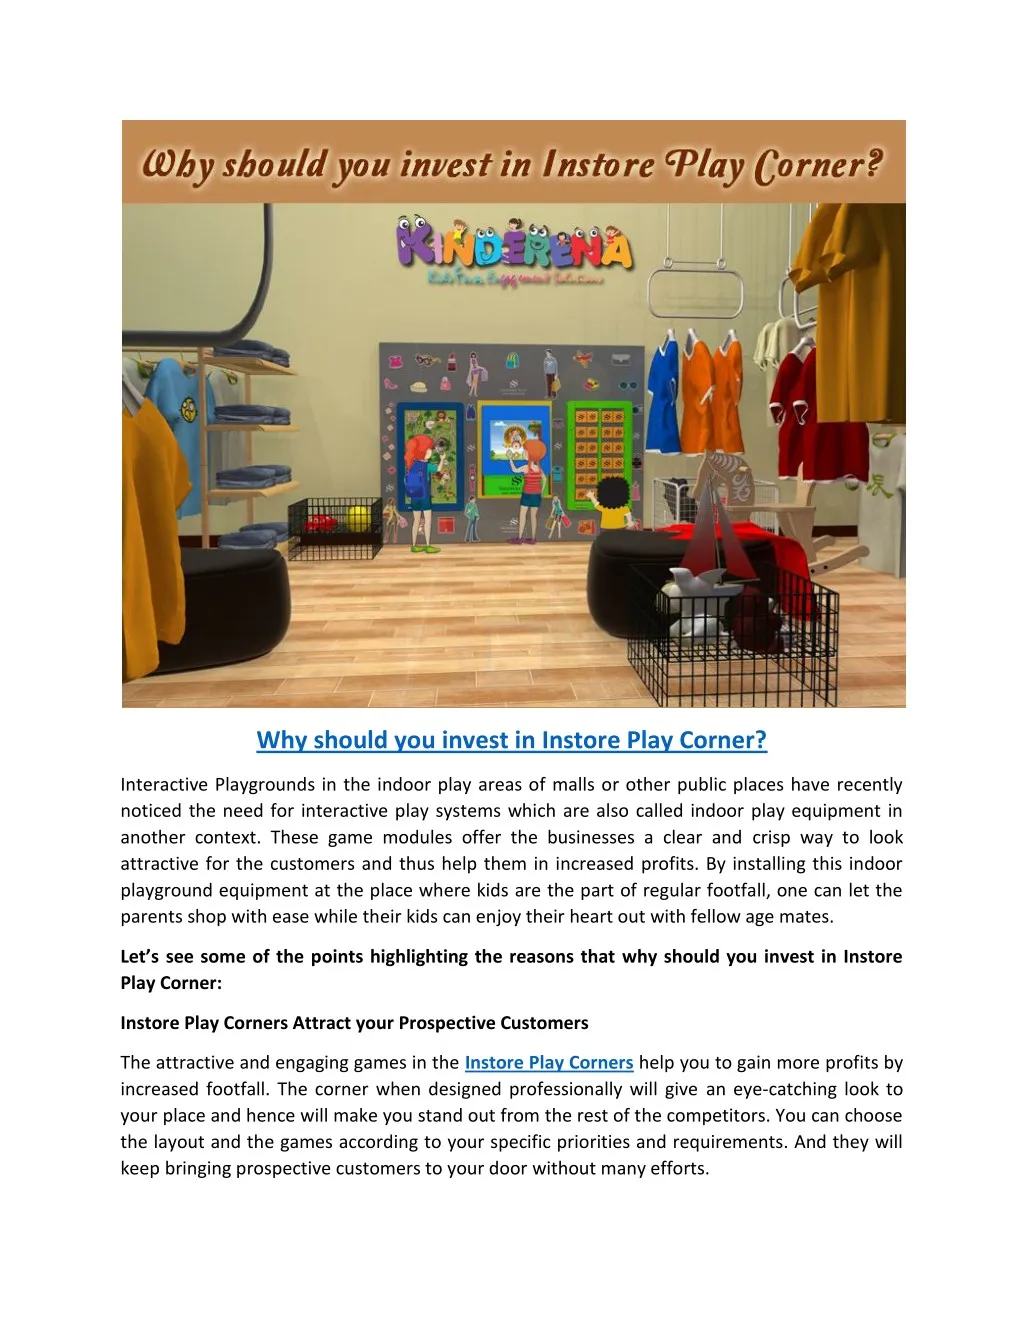 why should you invest in instore play corner